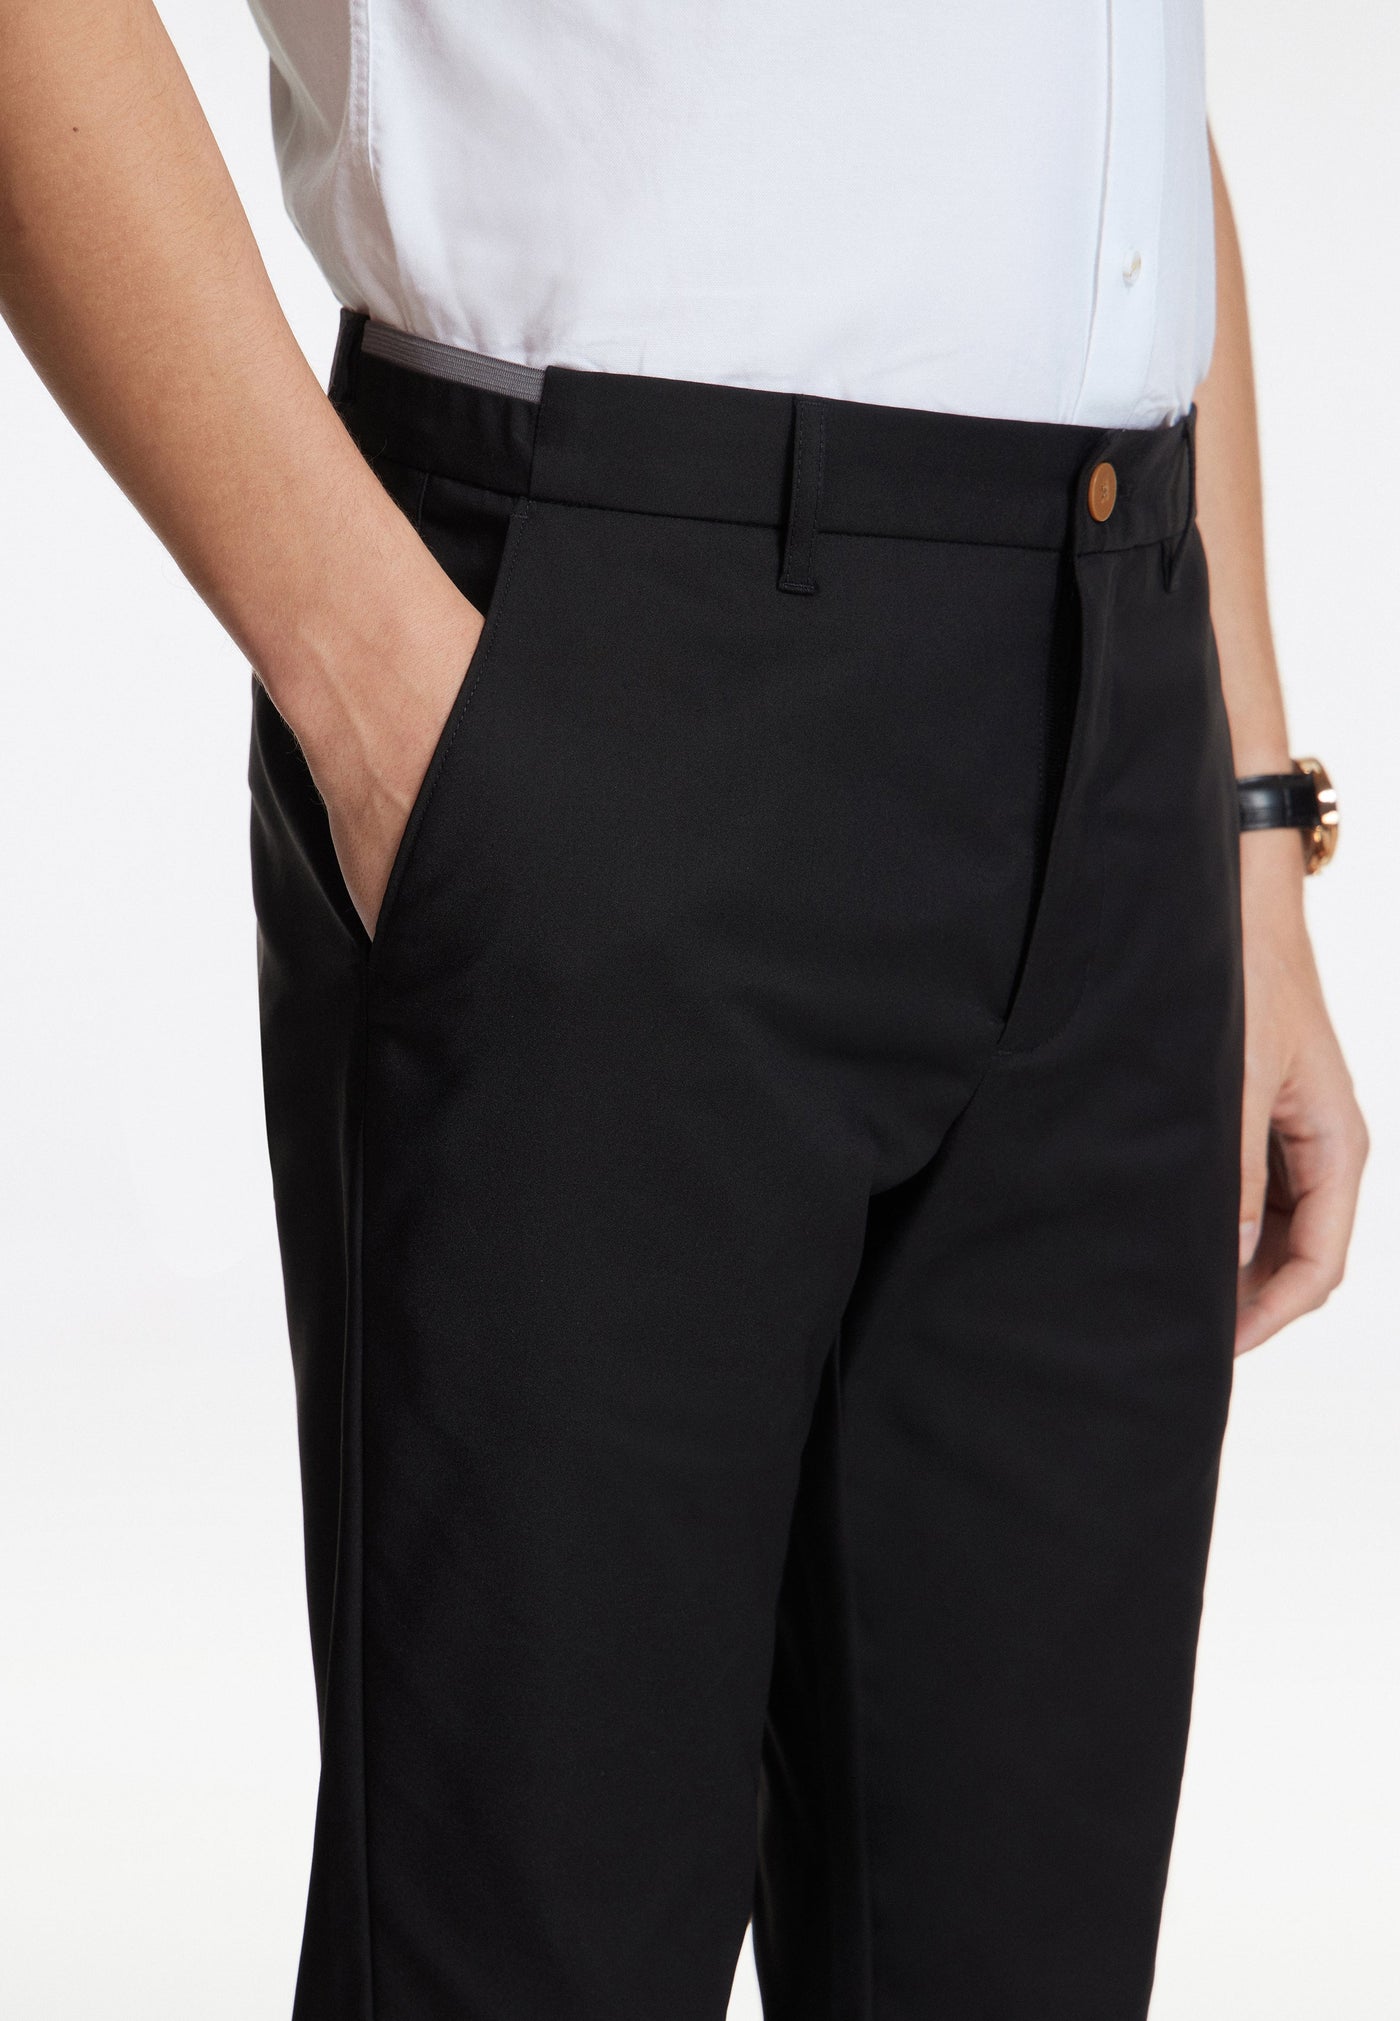 Mencody - Soft Cotton Rich Causal Pants Slim Tapered Fit